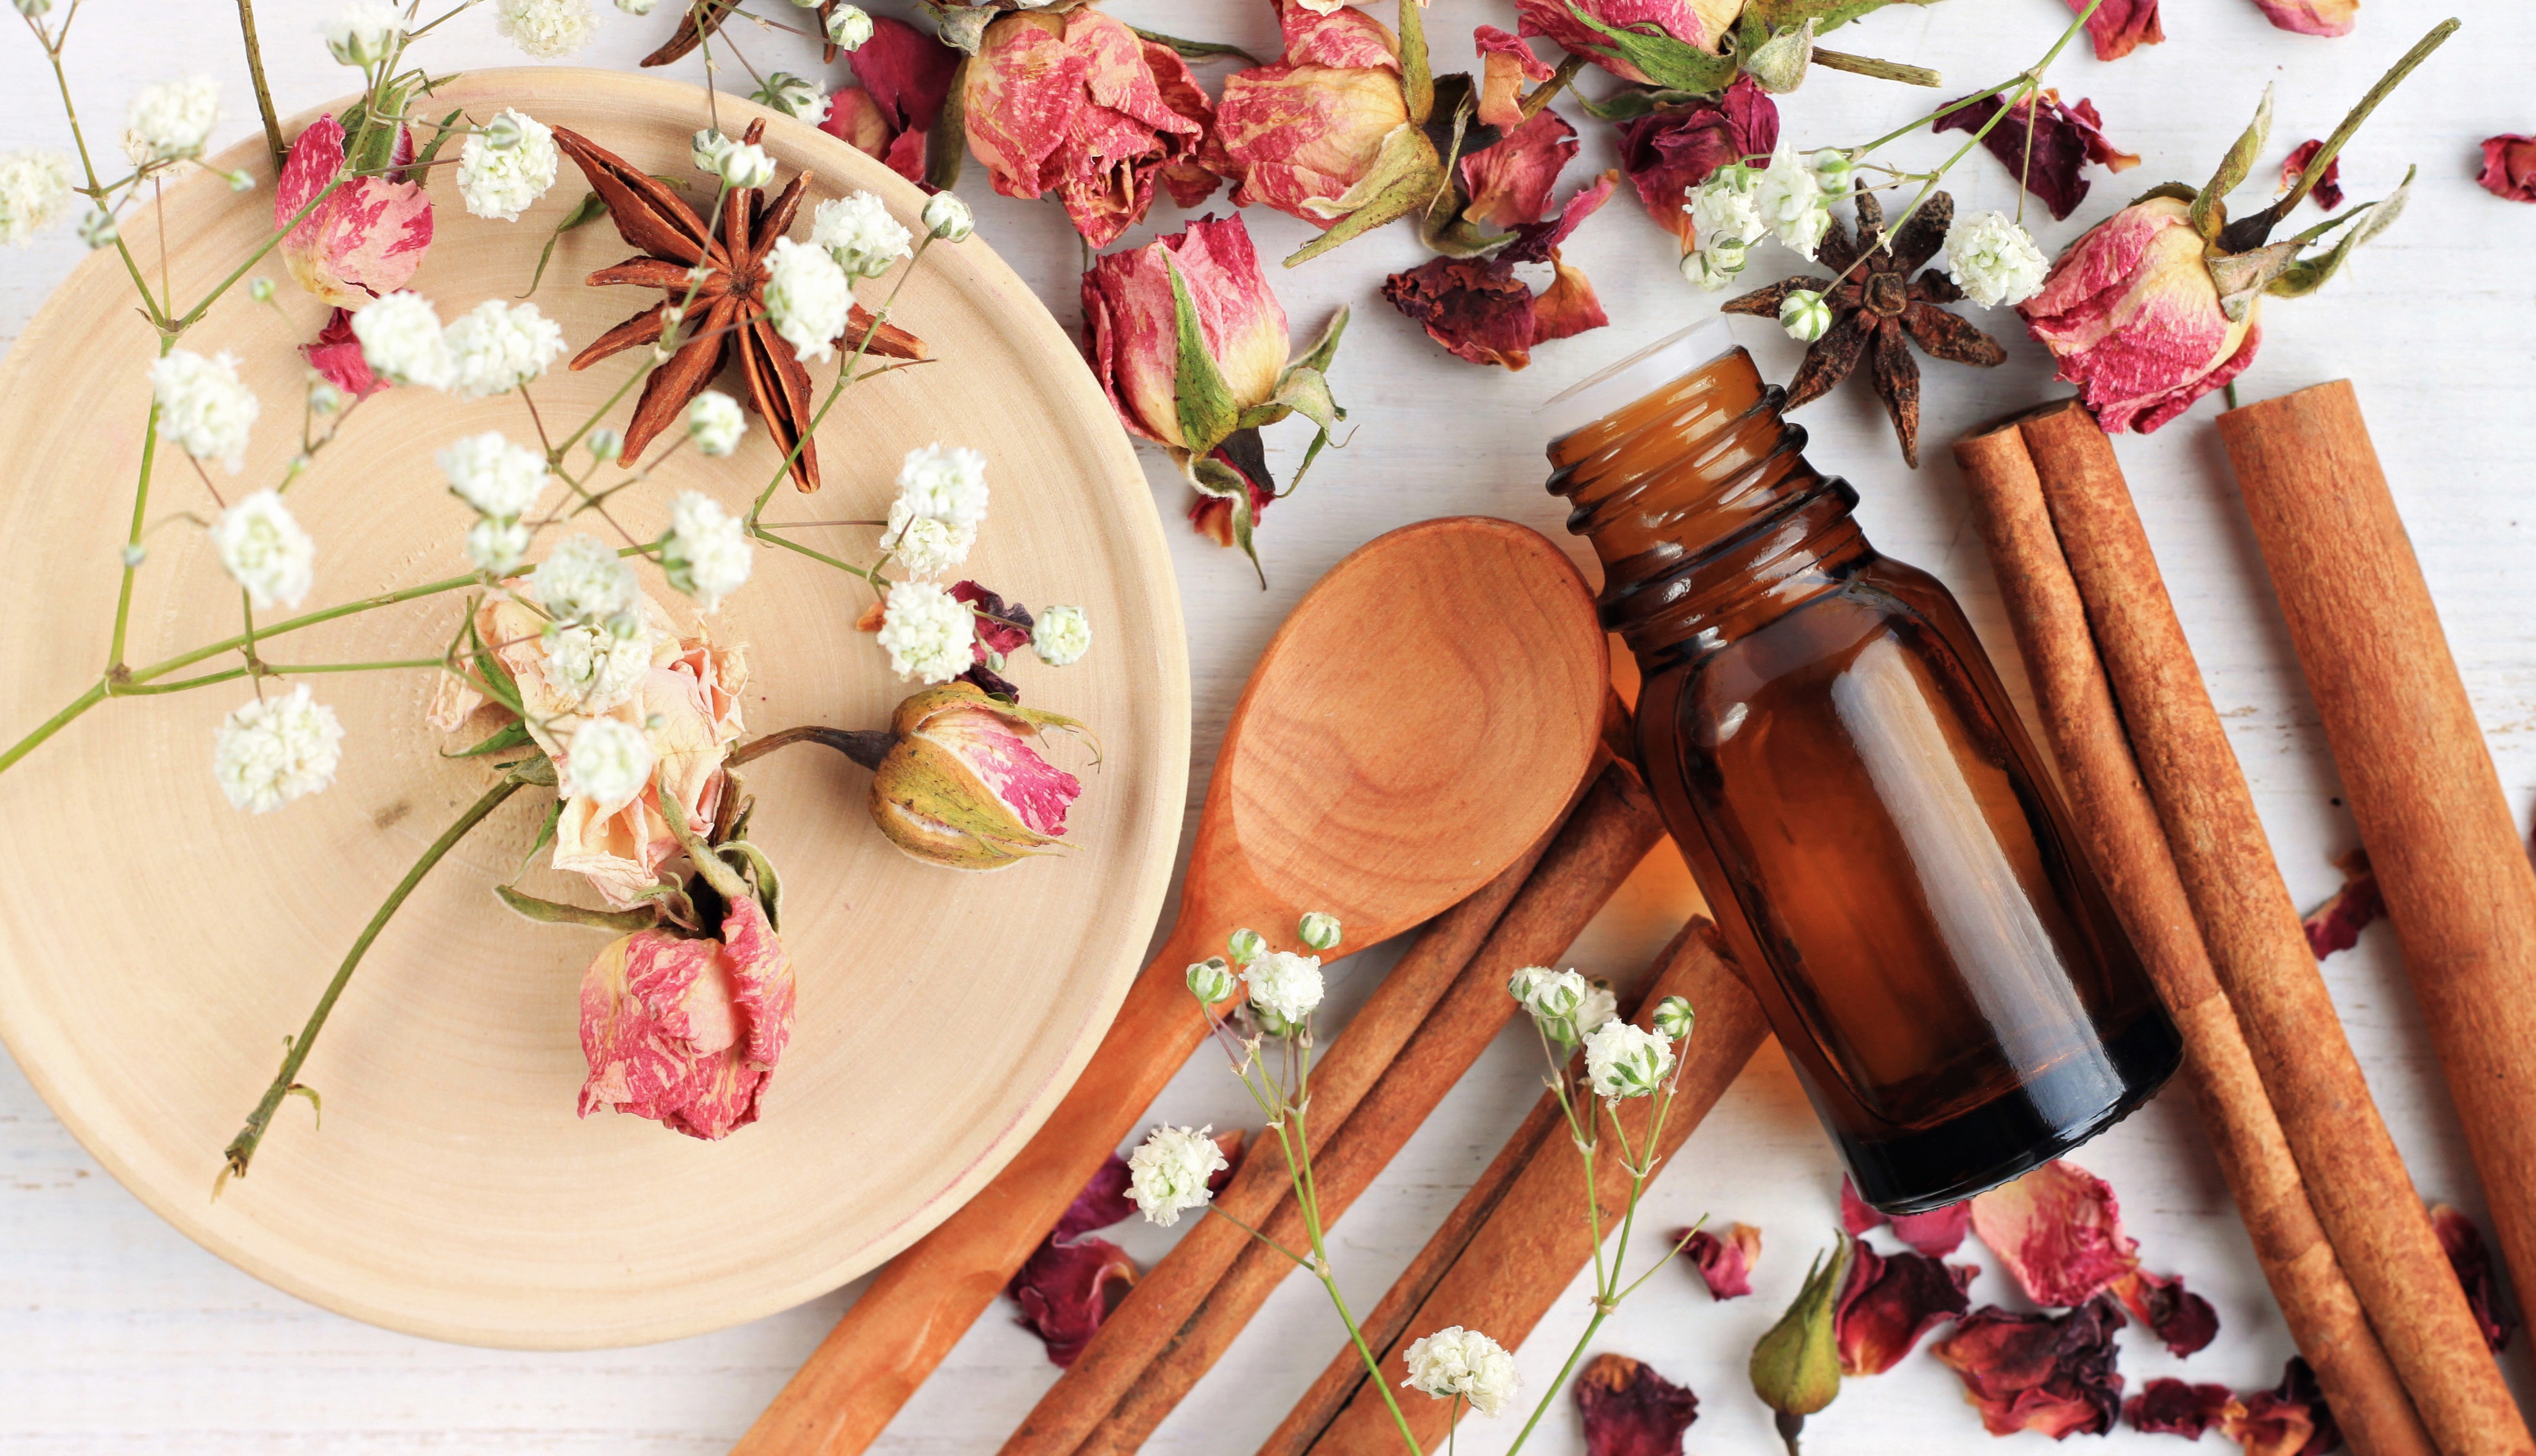 Crafting Household Essentials With Essential Oils: 5 DIY Ideas Cover Photo